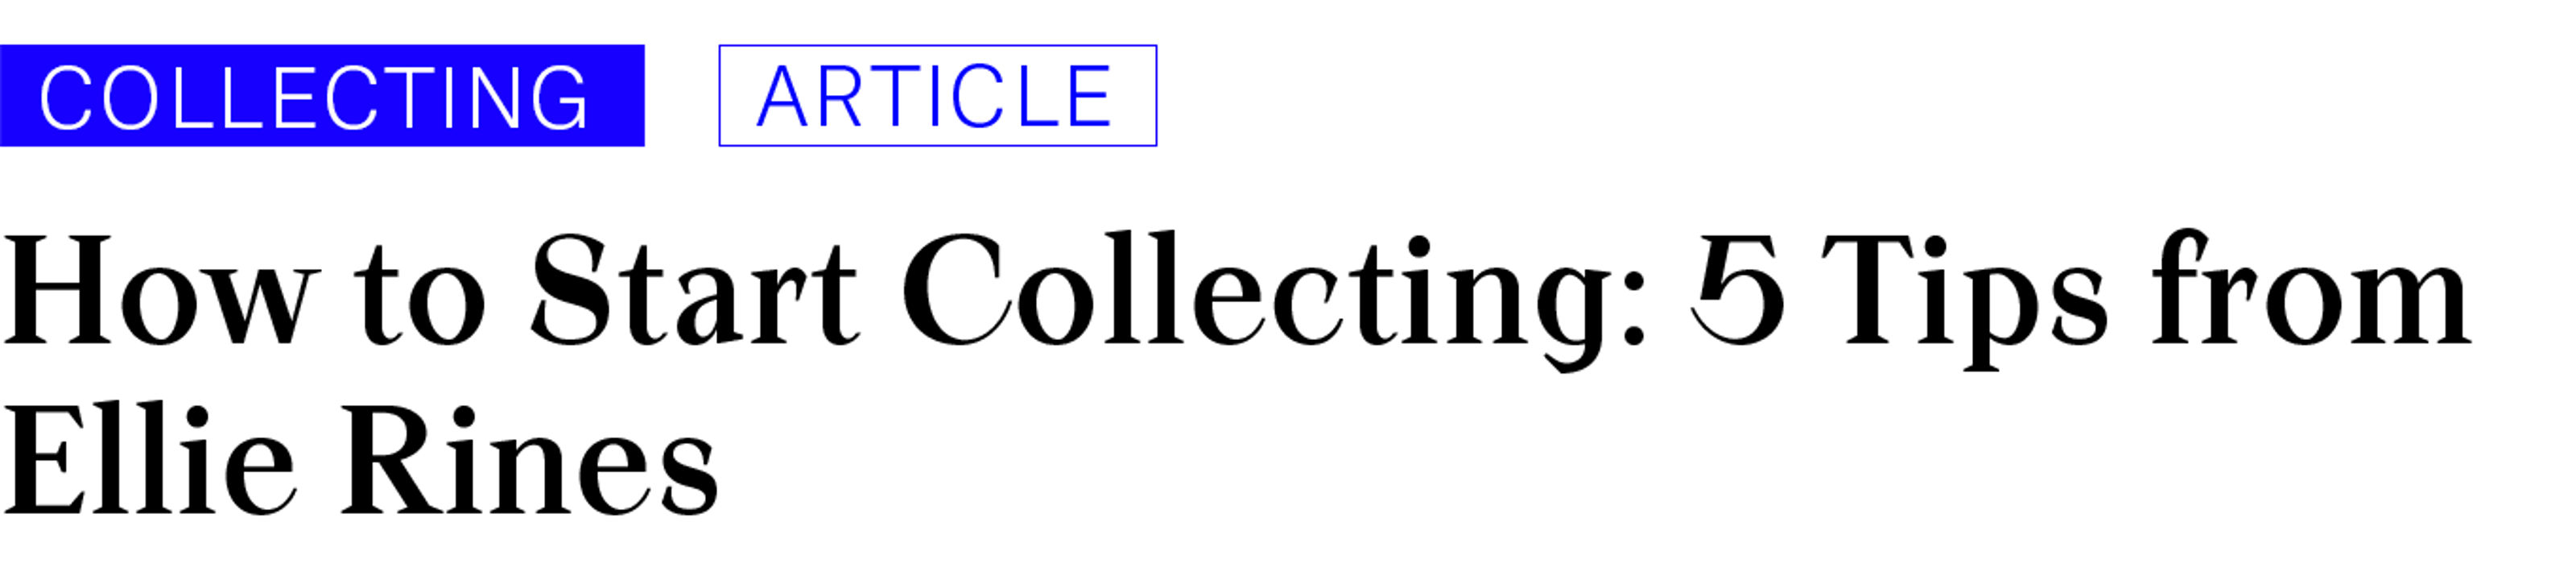 Collecting - Article. How to Start Collecting: 5 Tips from Ellie Rines